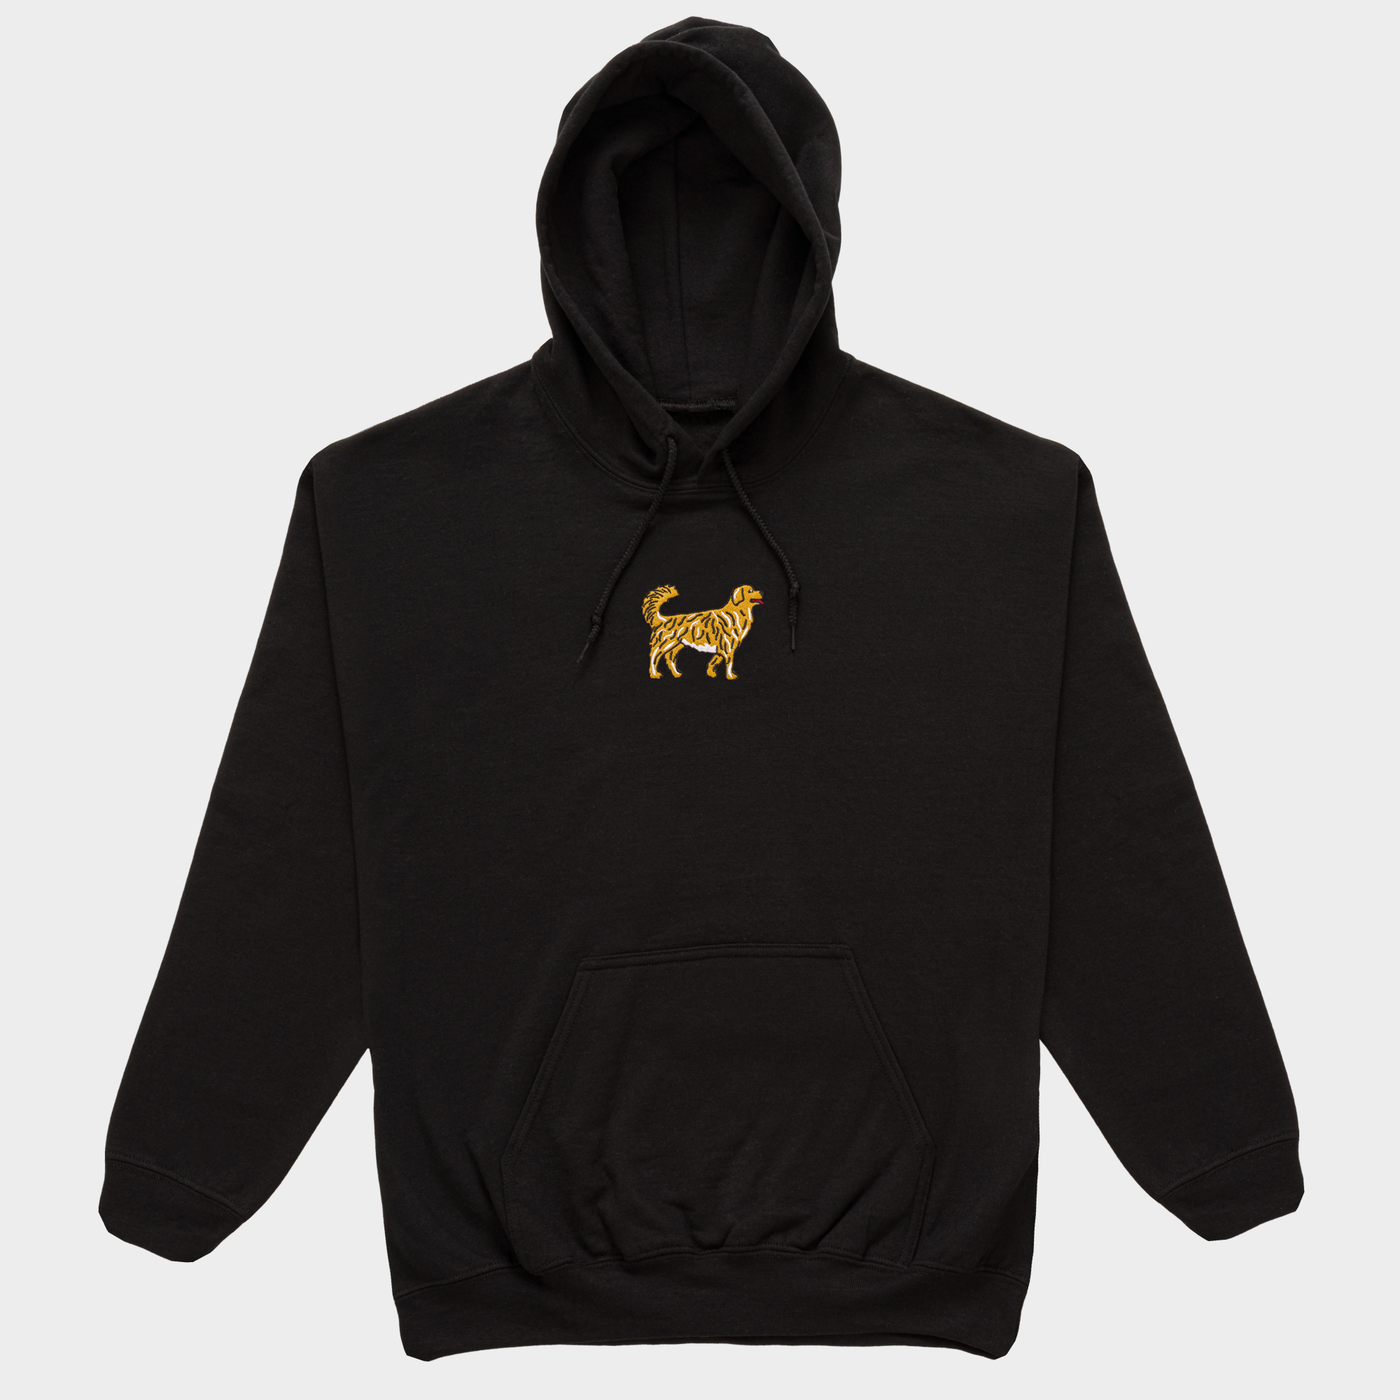 Bobby's Planet Men's Embroidered Golden Retriever Hoodie from Paws Dog Cat Animals Collection in Black Color#color_black